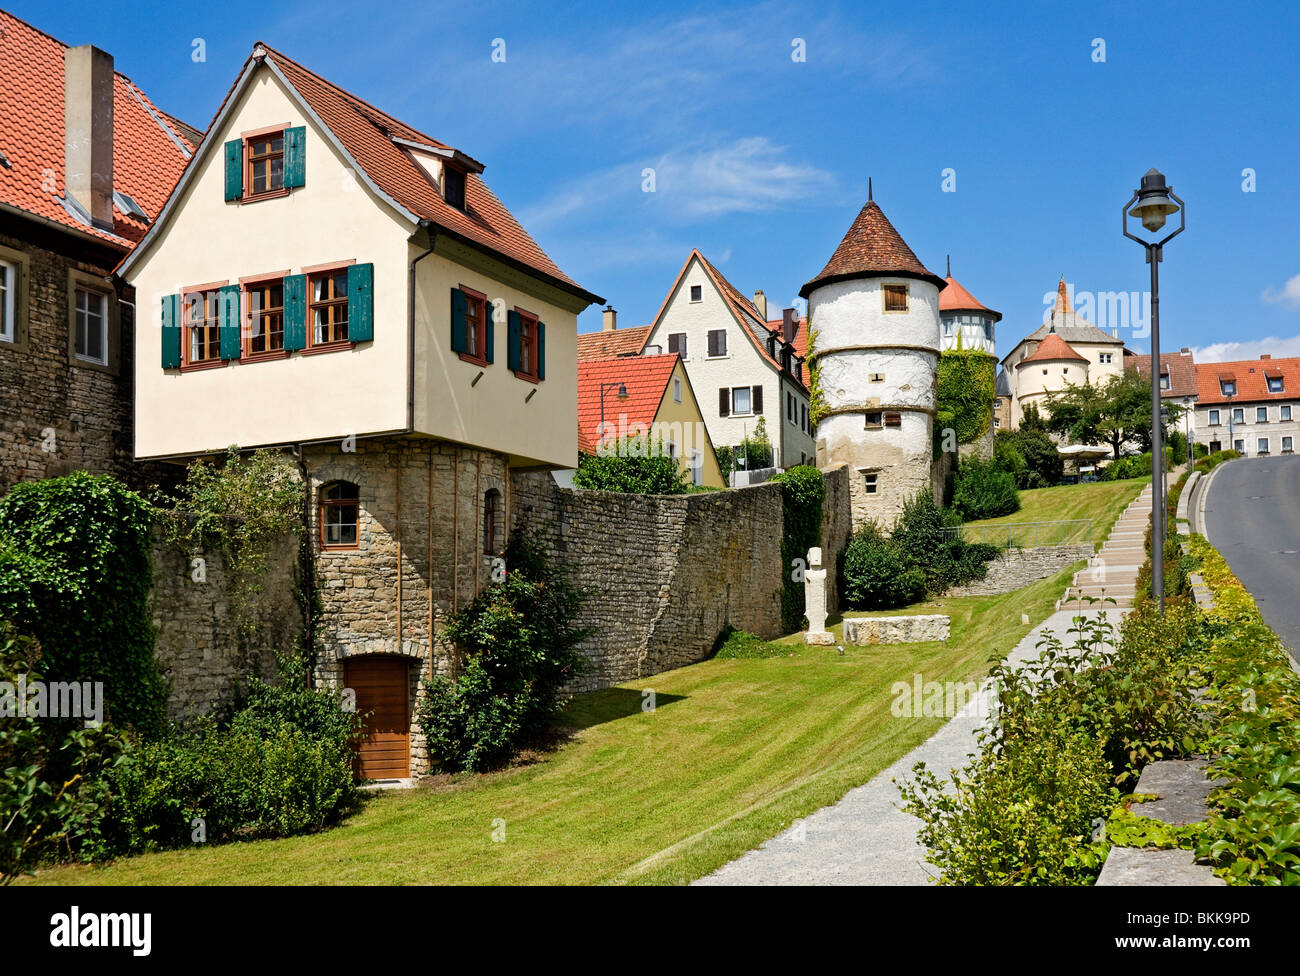 The picturesque town wall at Dettelbach near Würzburg, Lower Franconia, Bavaria, Germany. Stock Photo